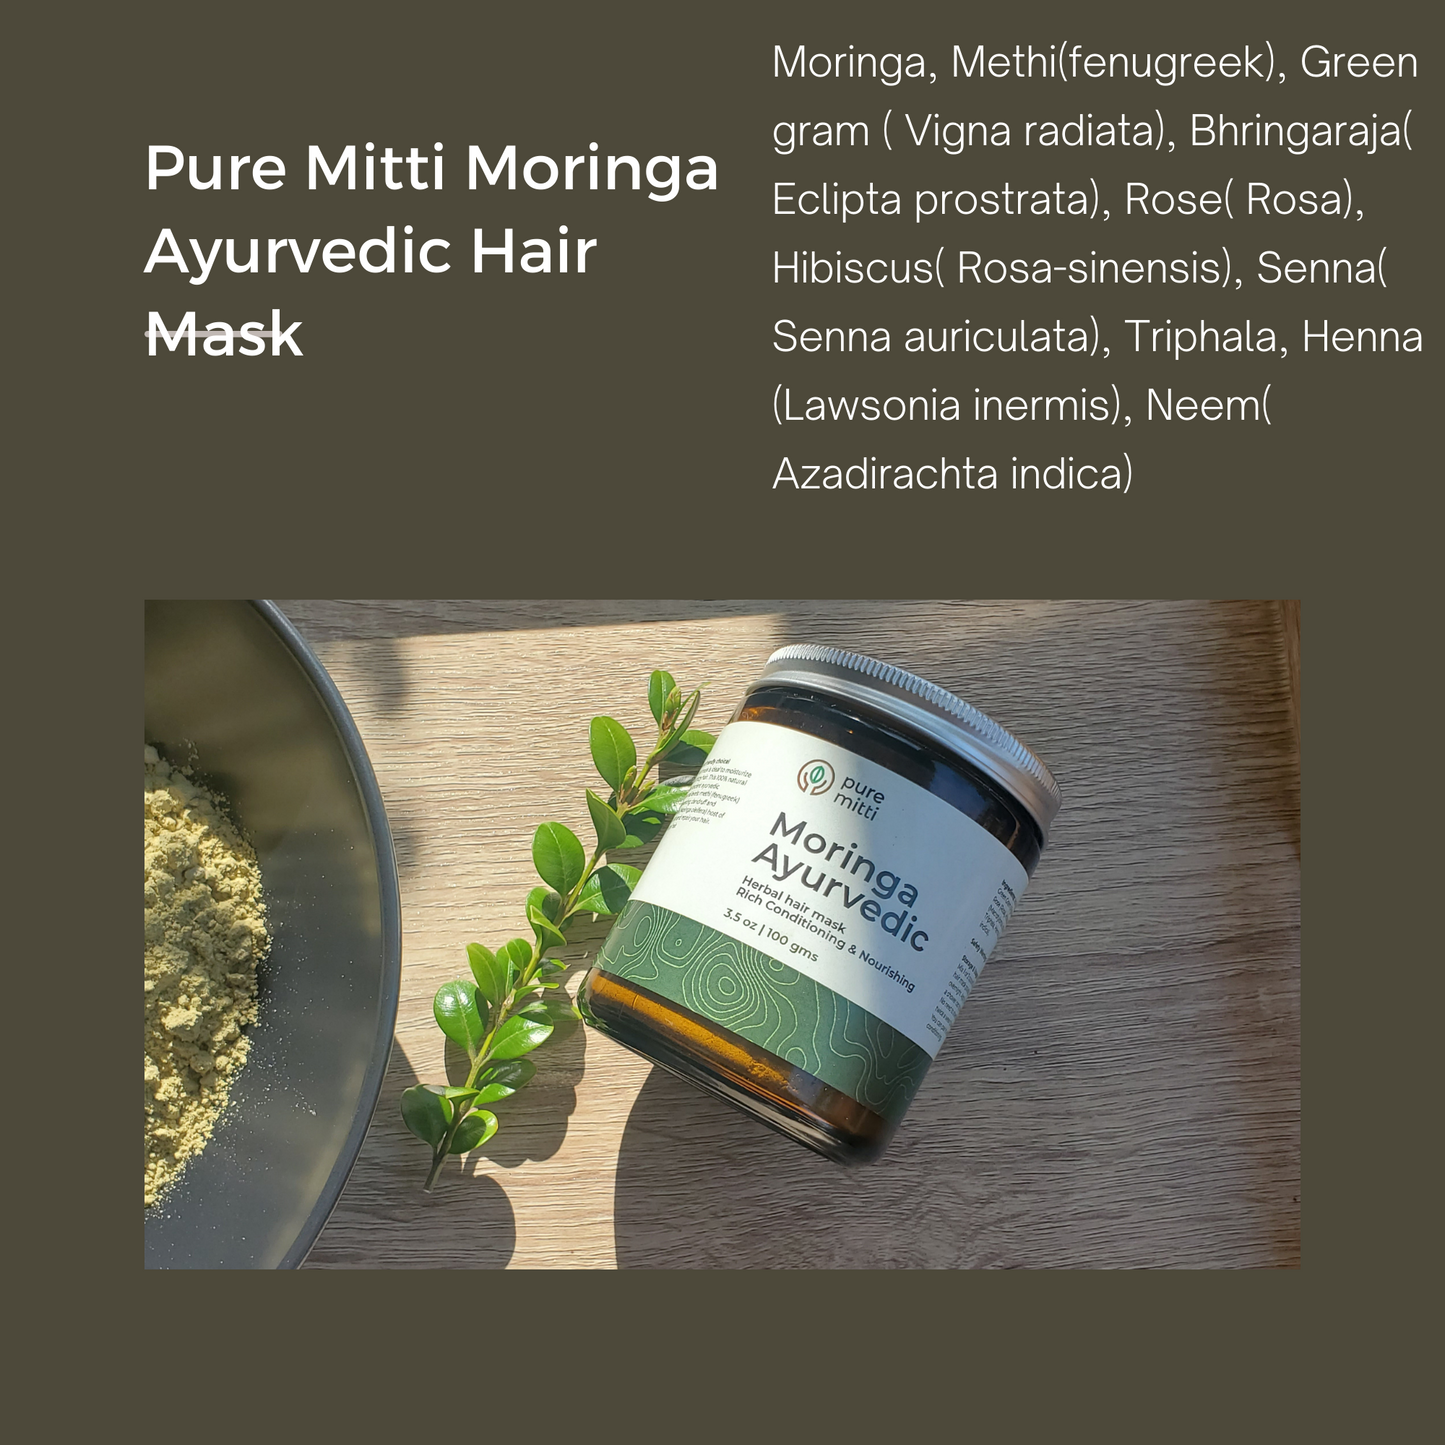 For the spa loving mom - Pure Mitti